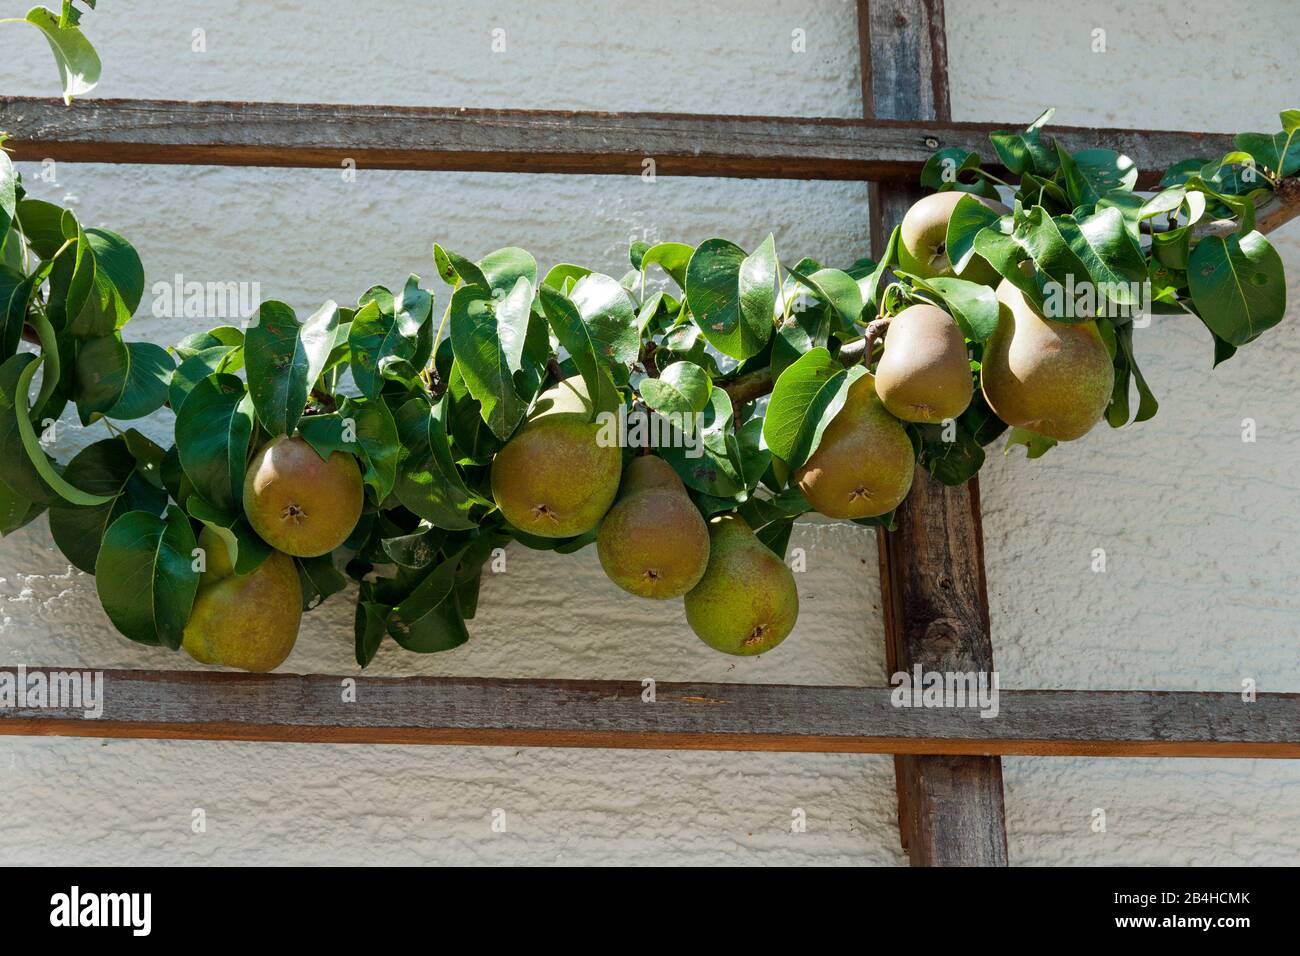 Germany, Baden-Württemberg, Schwäbisch Gmünd-Degenfeld, pears hang on the pear trellis tree at the house wall. Stock Photo